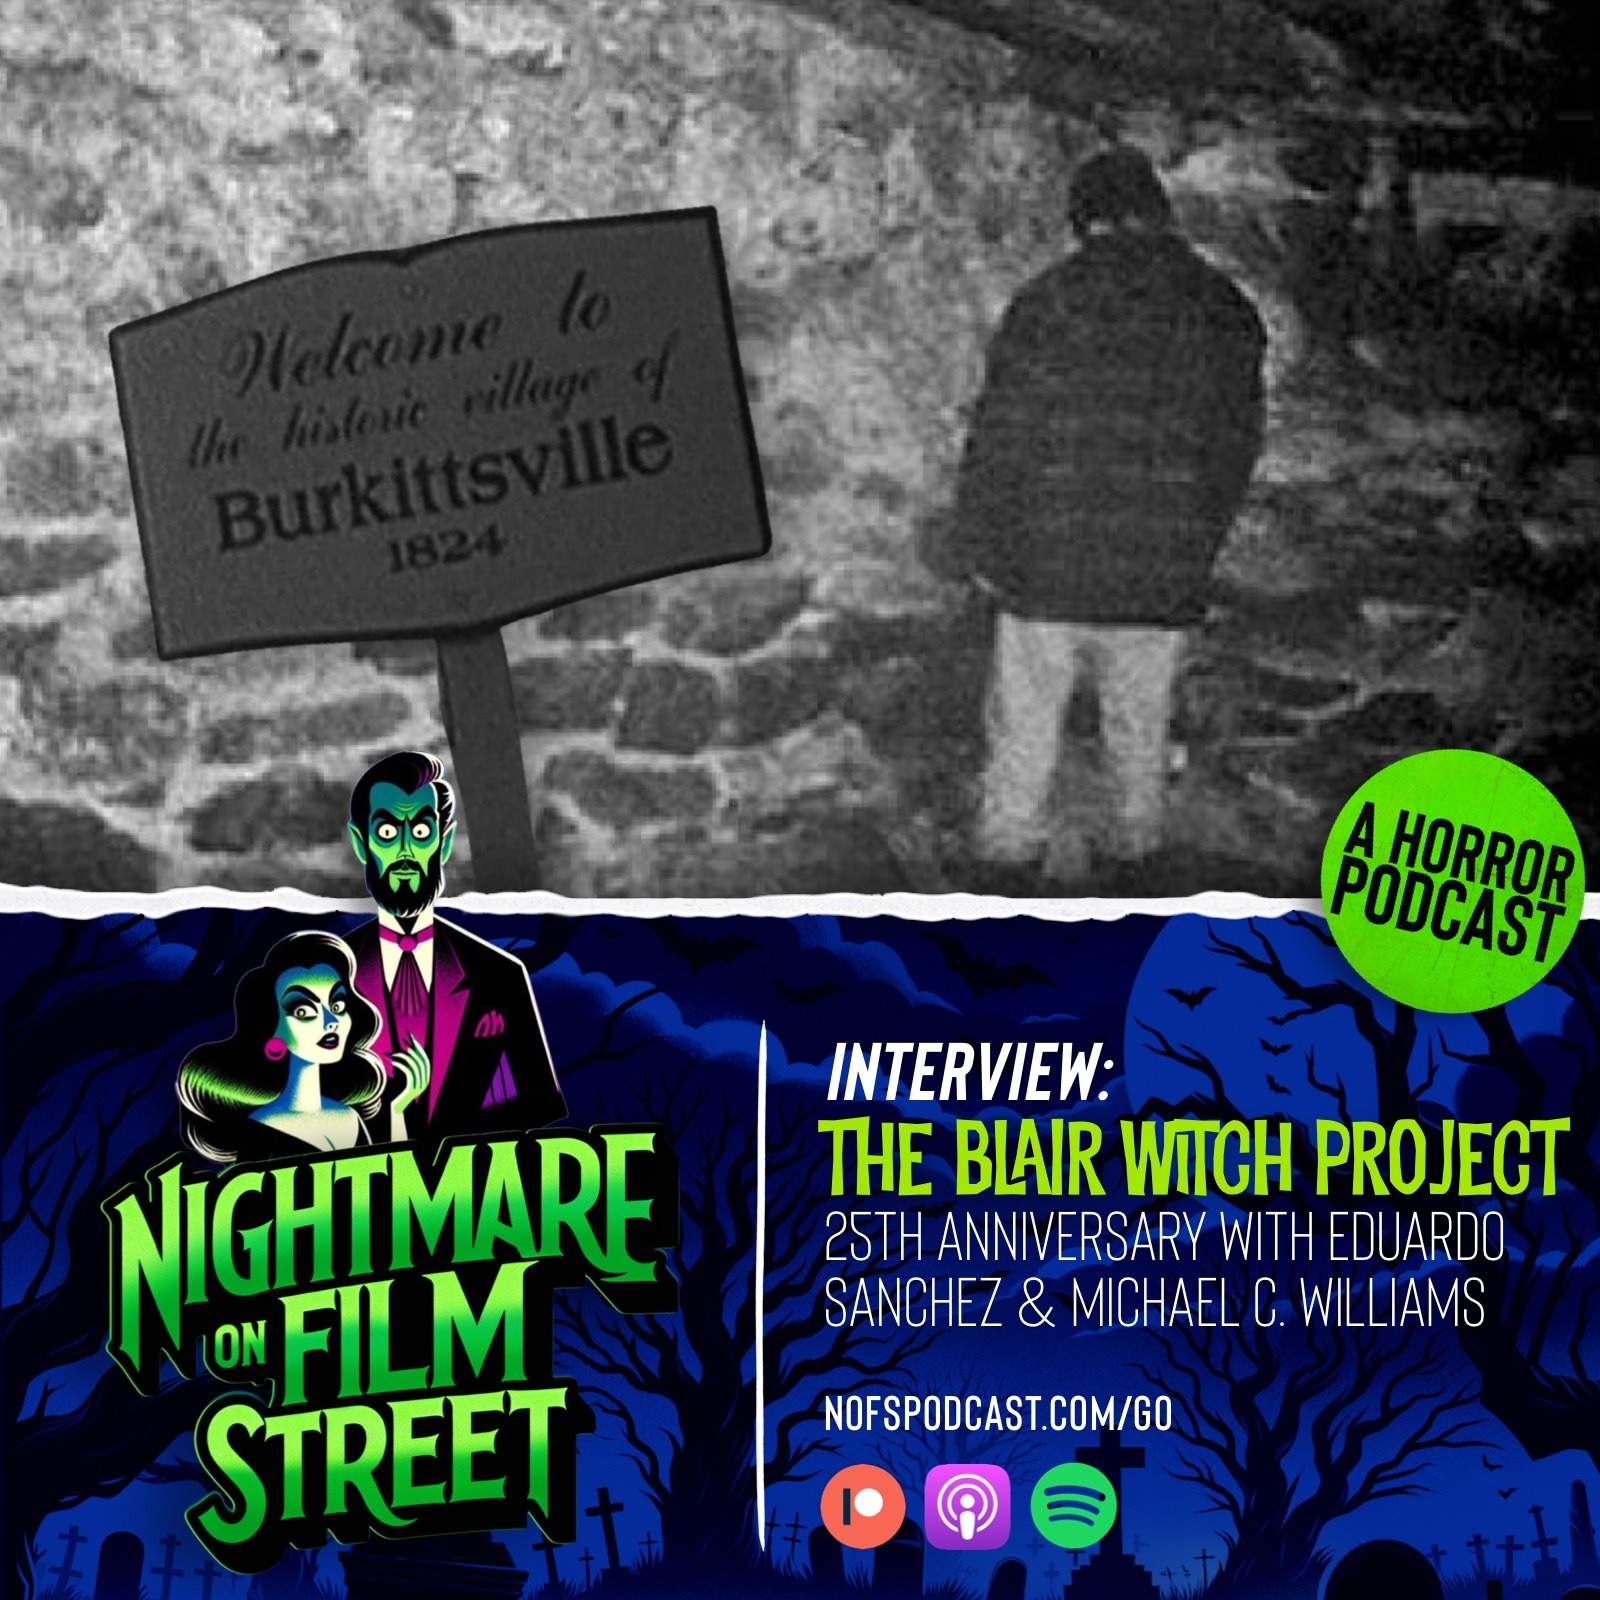 Nightmare Alley: The Blair Witch Project 25th Anniversary with Eduardo Sanchez & Michael C. Williams